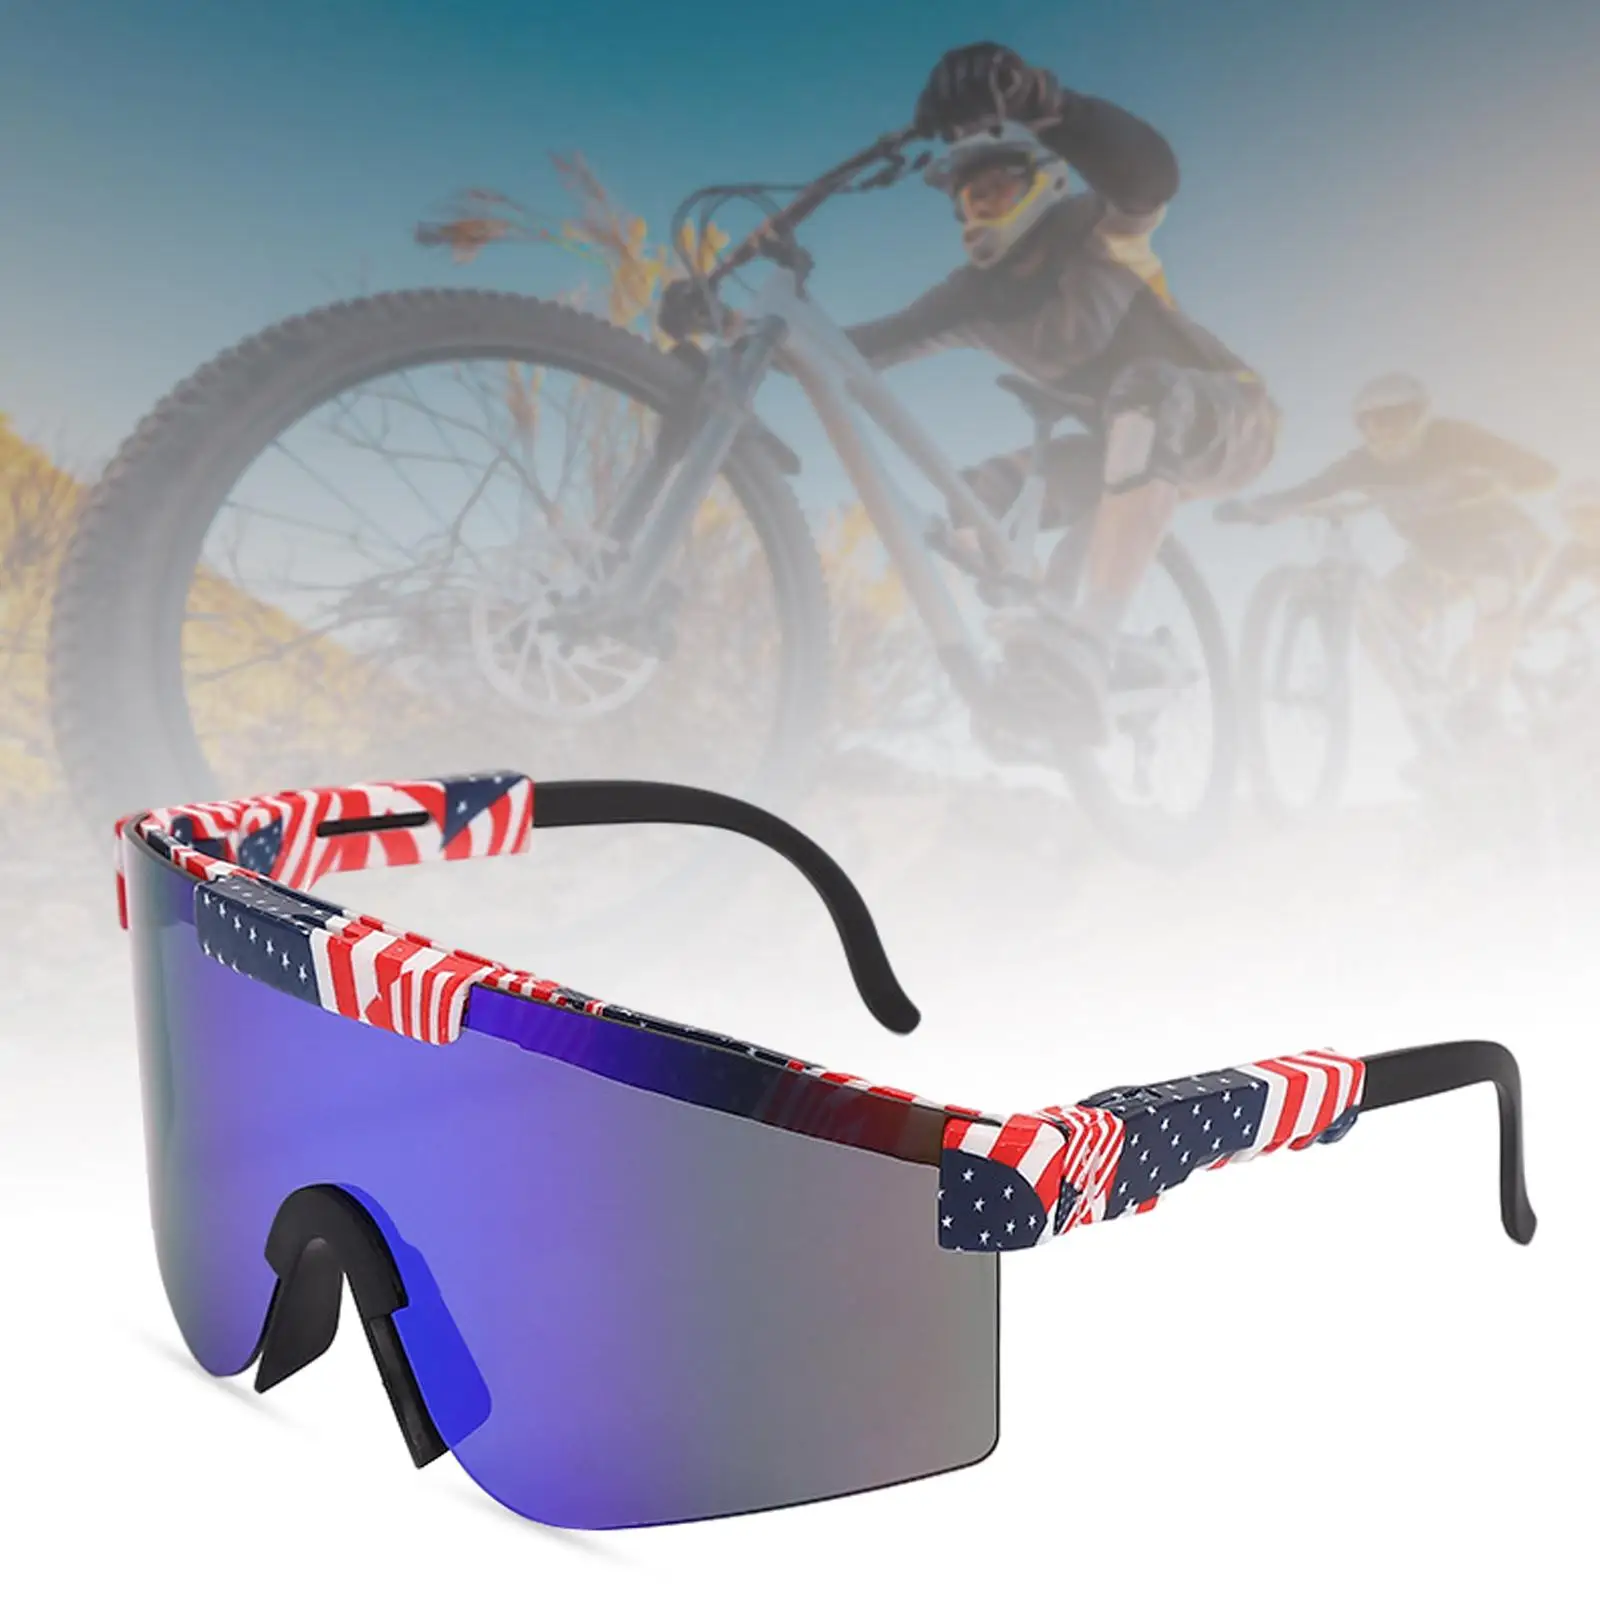 Women Men Cycling Goggles Sunglass UV380 Polarized Driving Golf UV Protect Sun Glasses Motorcycle Outdoor Eye Protector with box